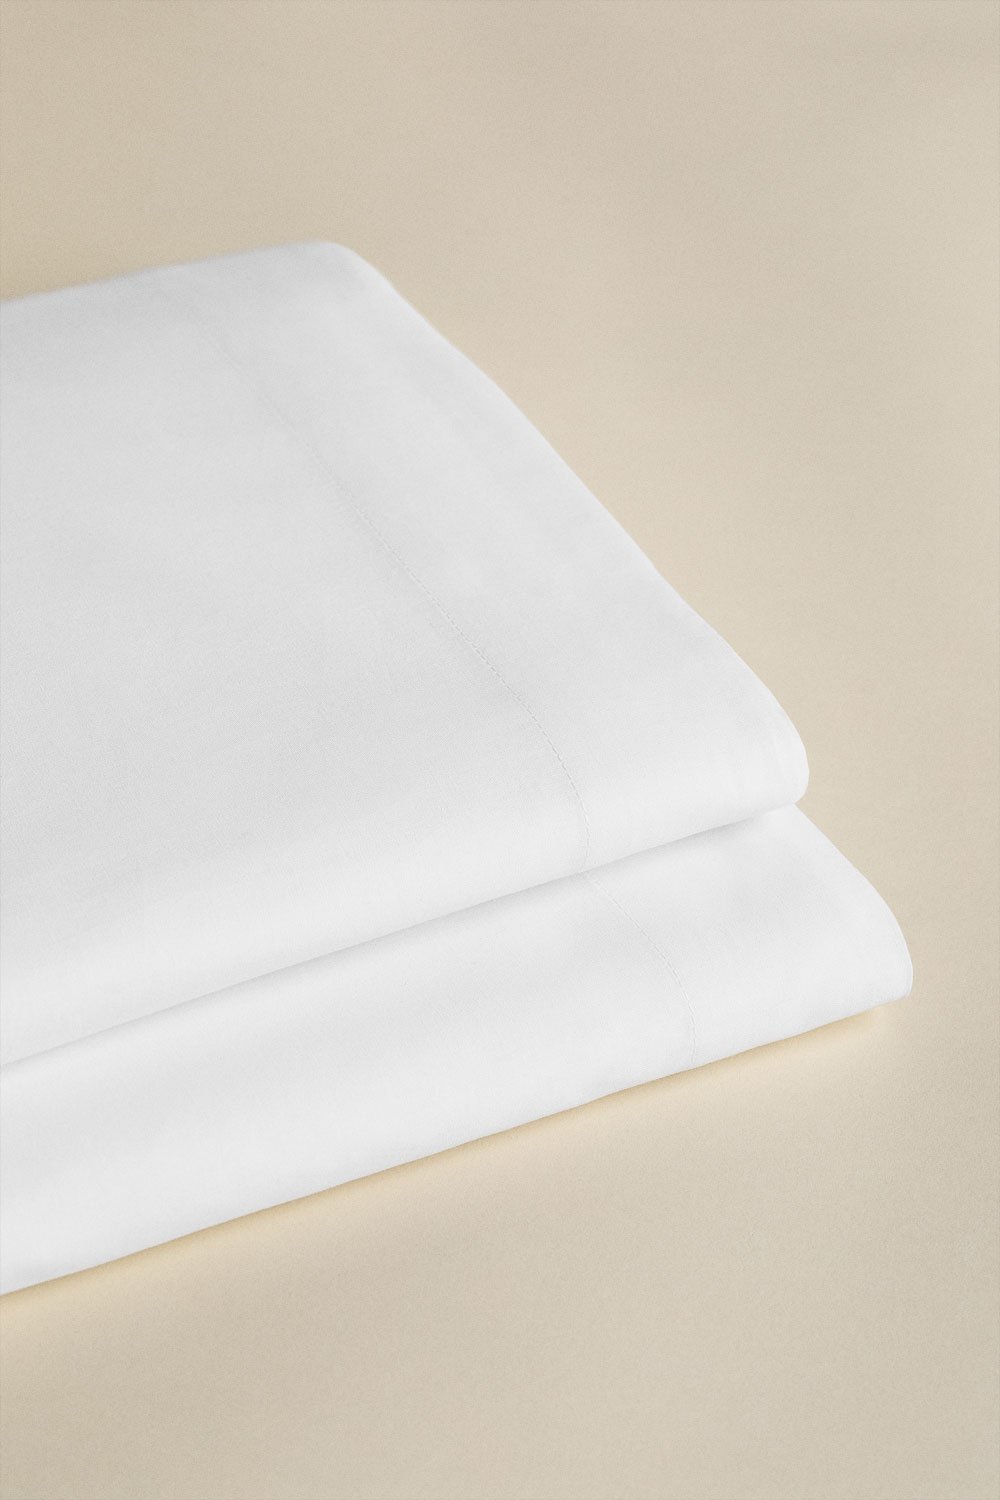 Lesia 180 Thread Count Percale Cotton Flat Sheet, gallery image 1